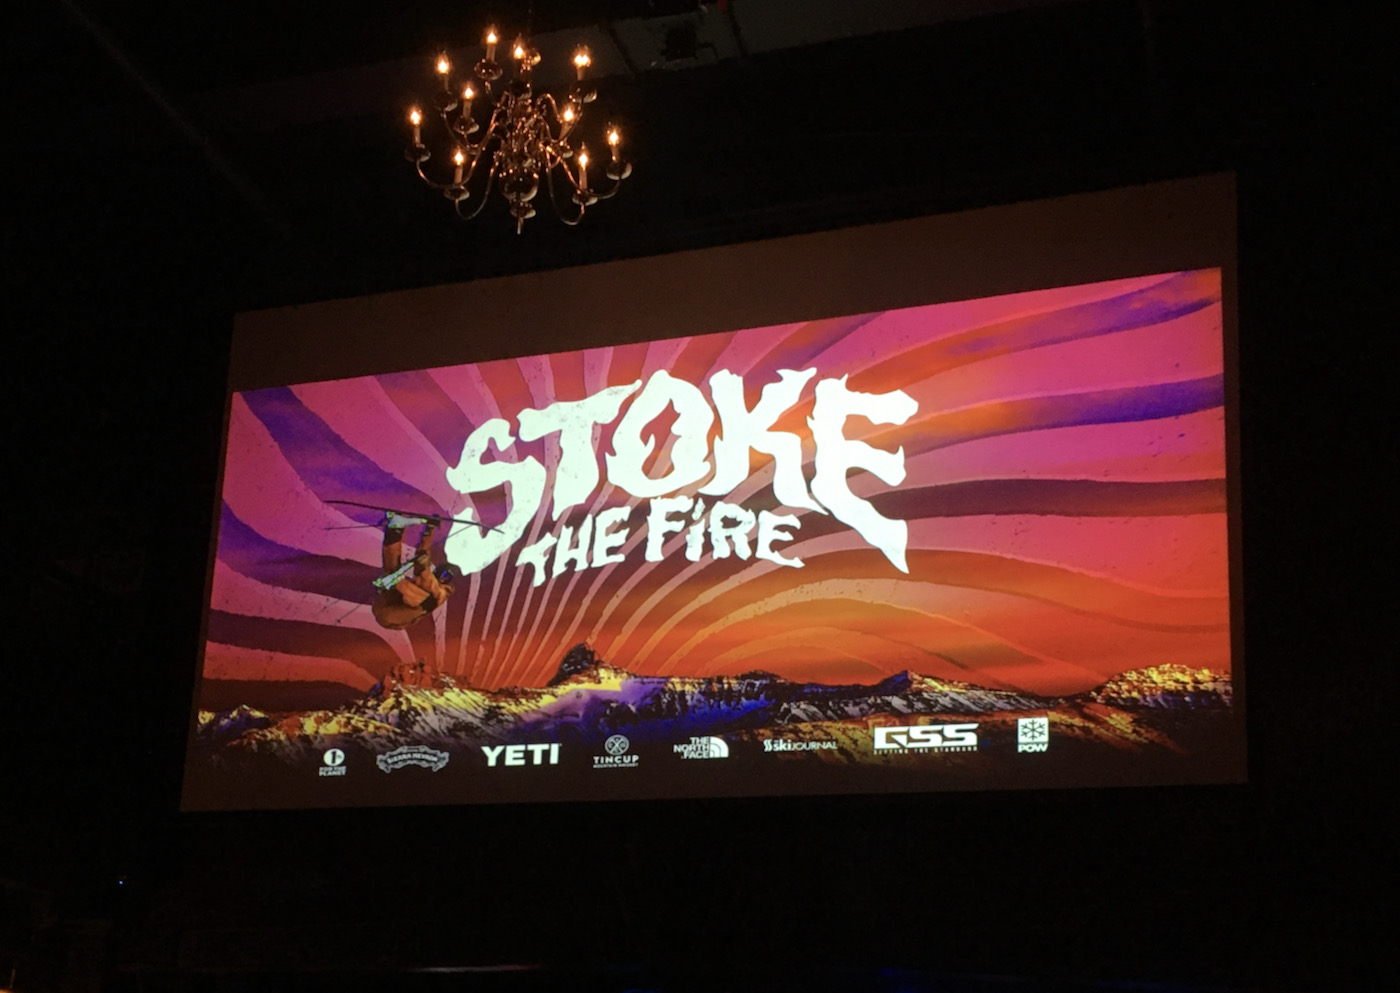 Stoke the Fire